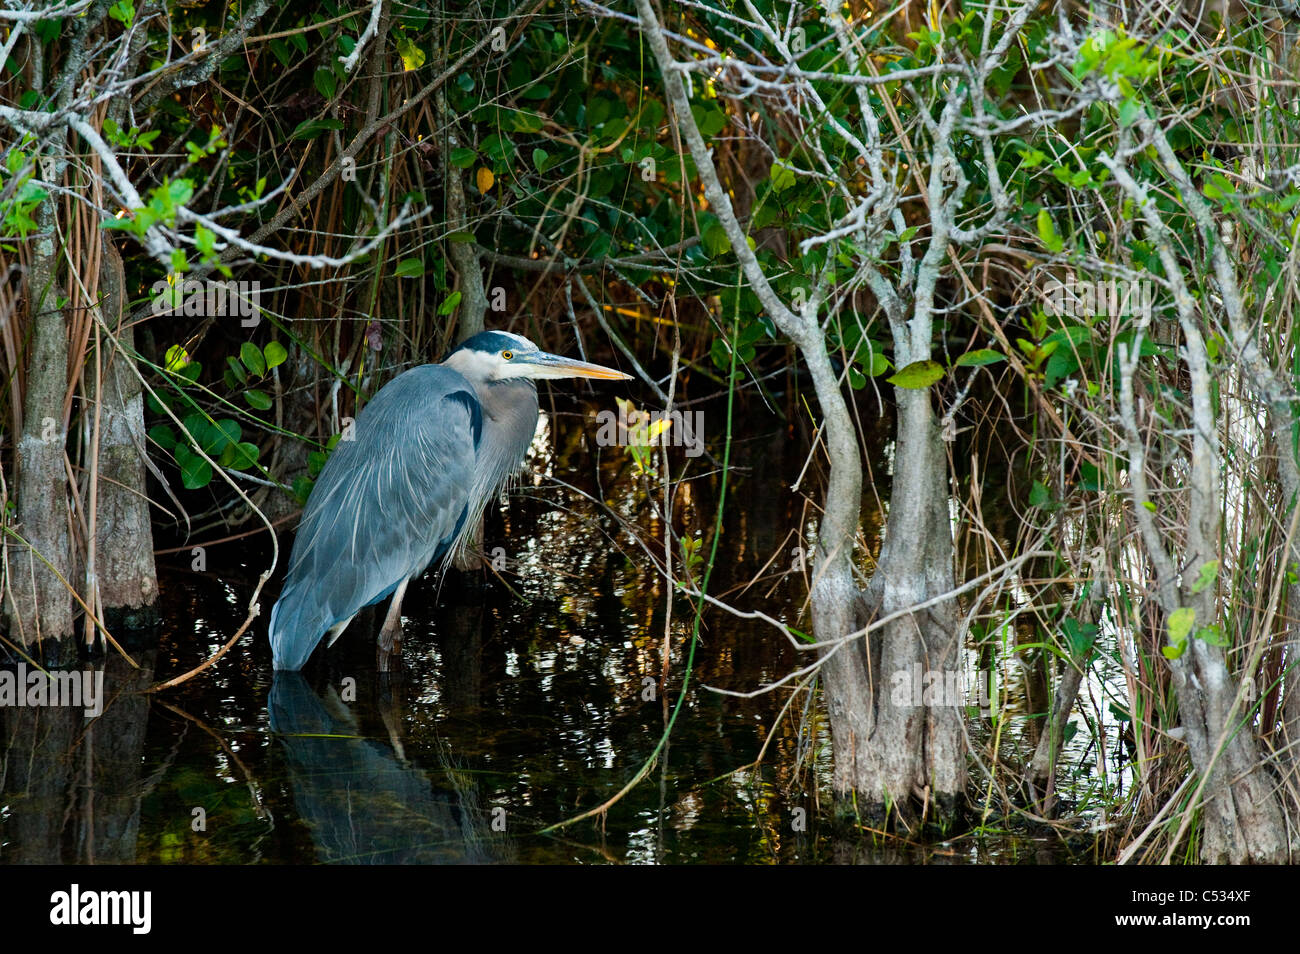 A Great Blue Heron (Ardea herodias) wades in the shallows of Shark Valley in Everglades National Park, Florida. Stock Photo